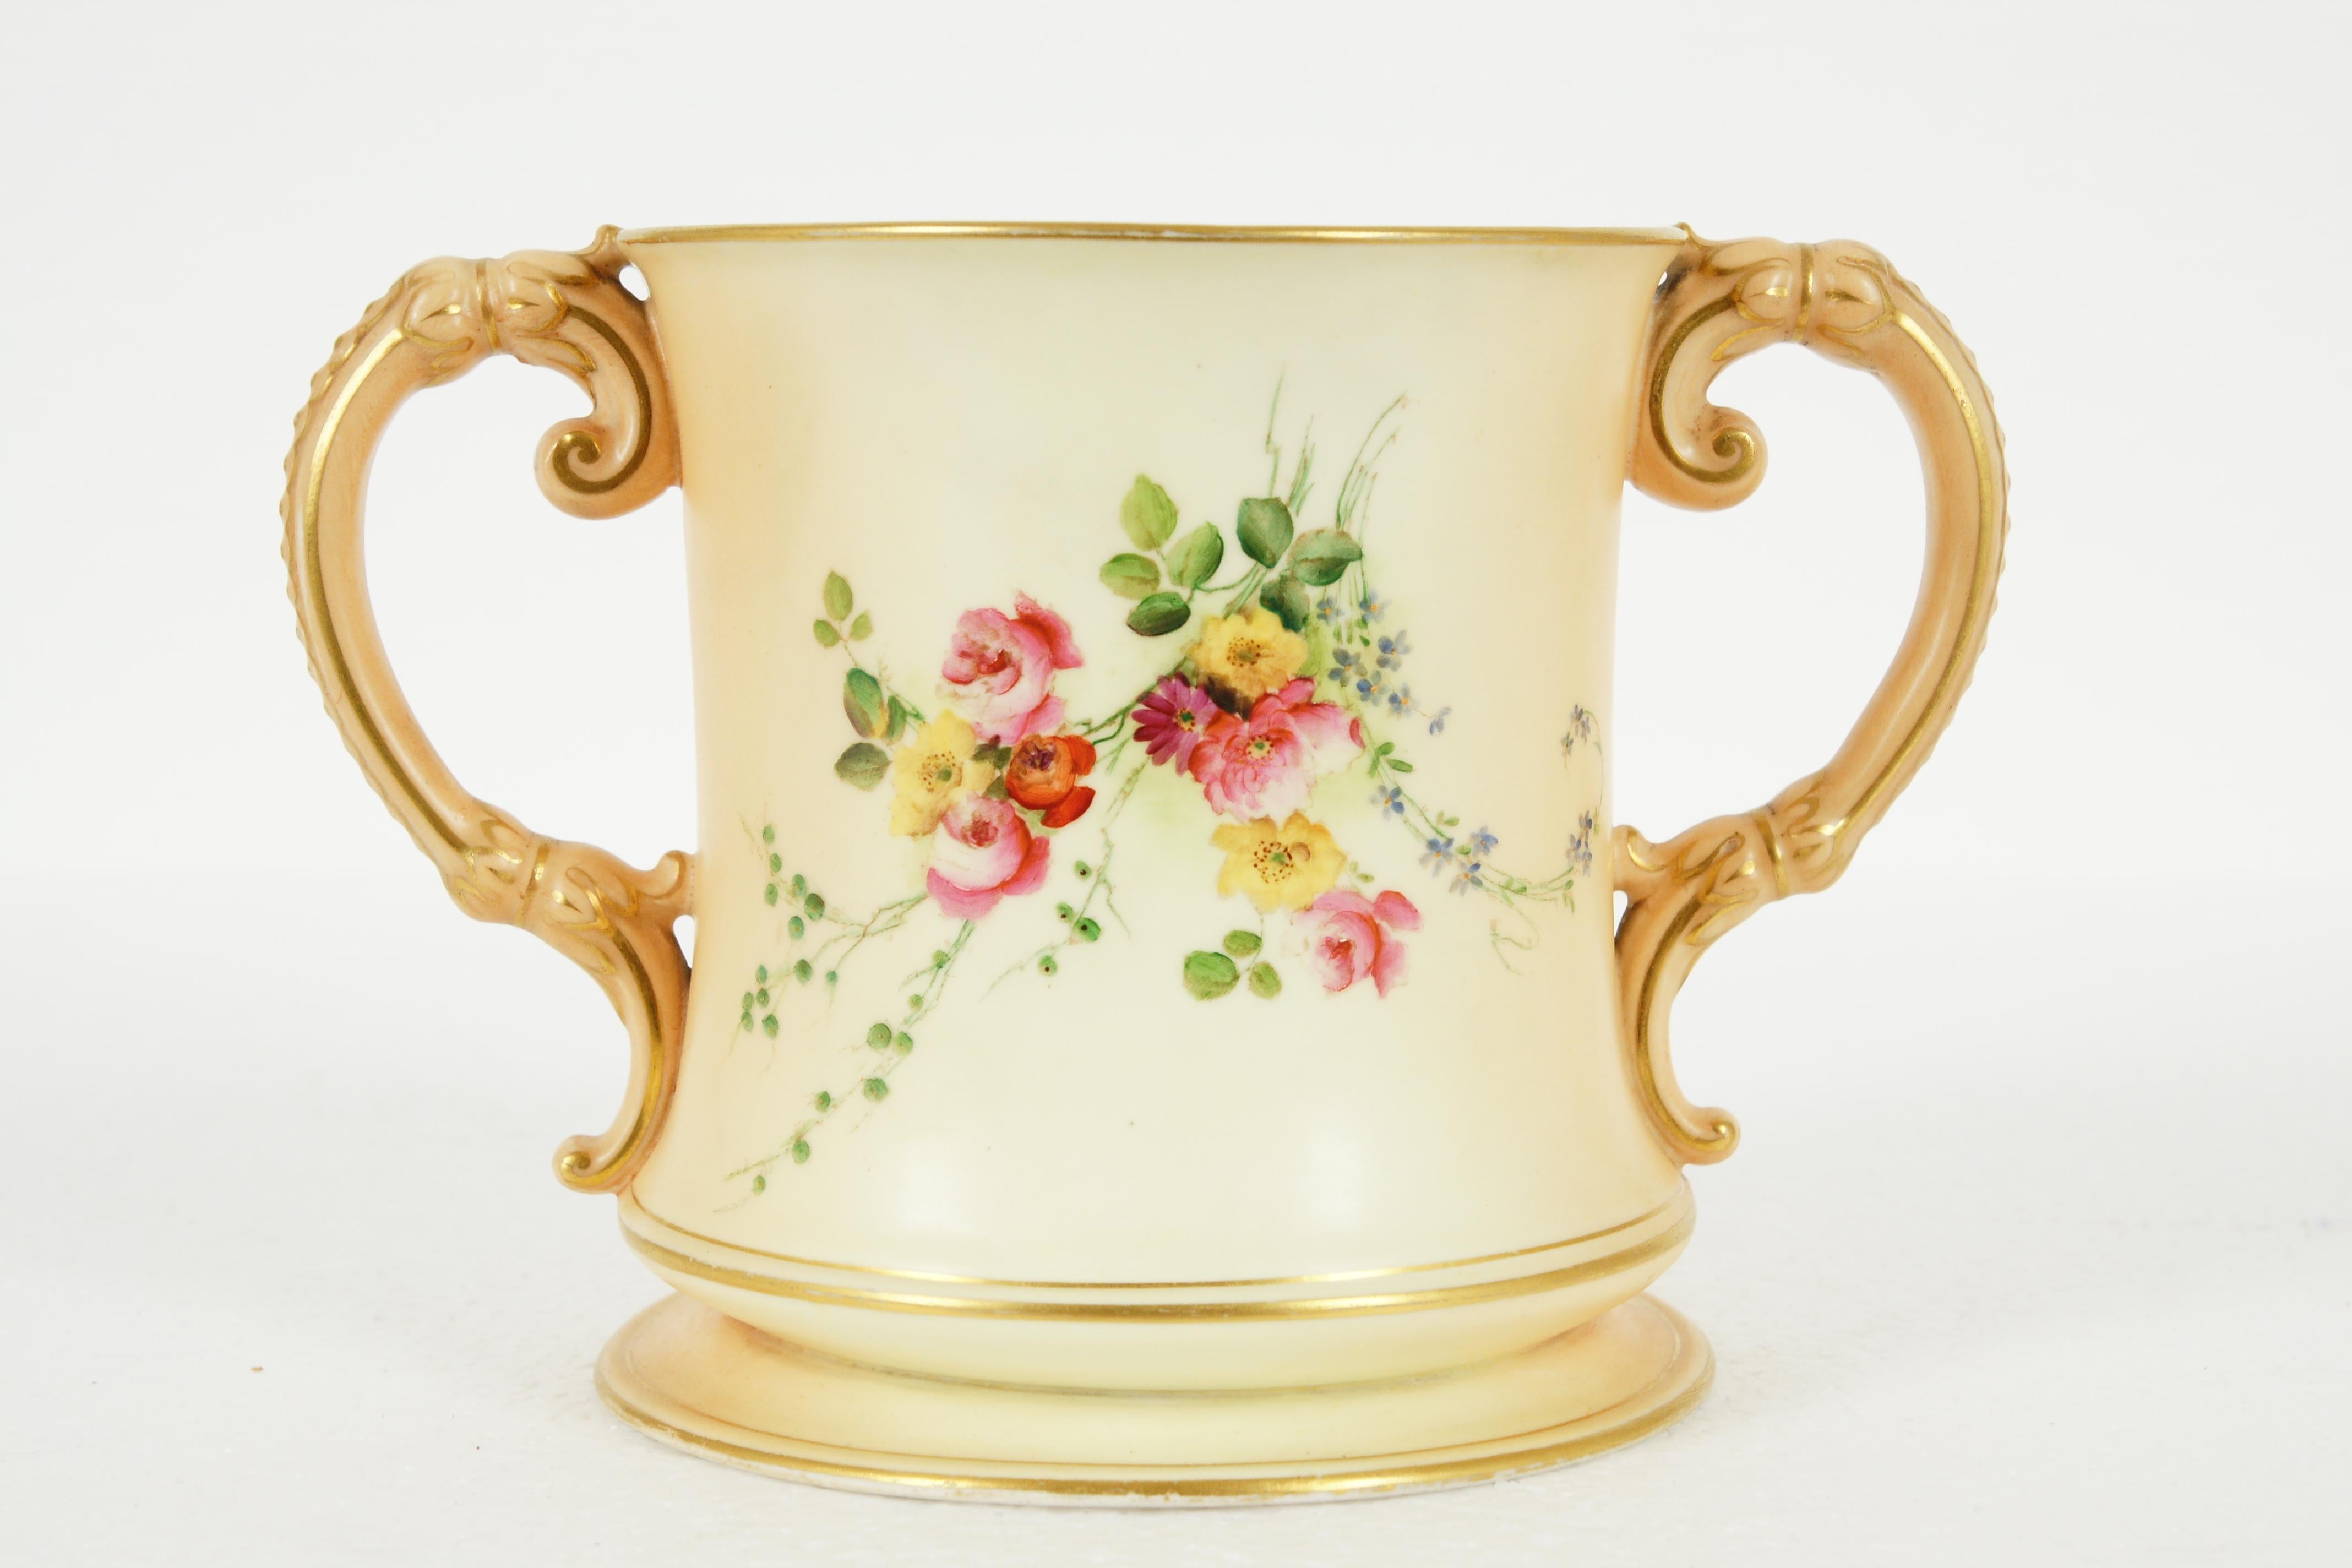 Antique Royal Worcester, two handled vase, #5, B1987

Hand painted floral decoration
In very good condition
Some wear on gold leaf to the bottom

B1987

Measures: 9